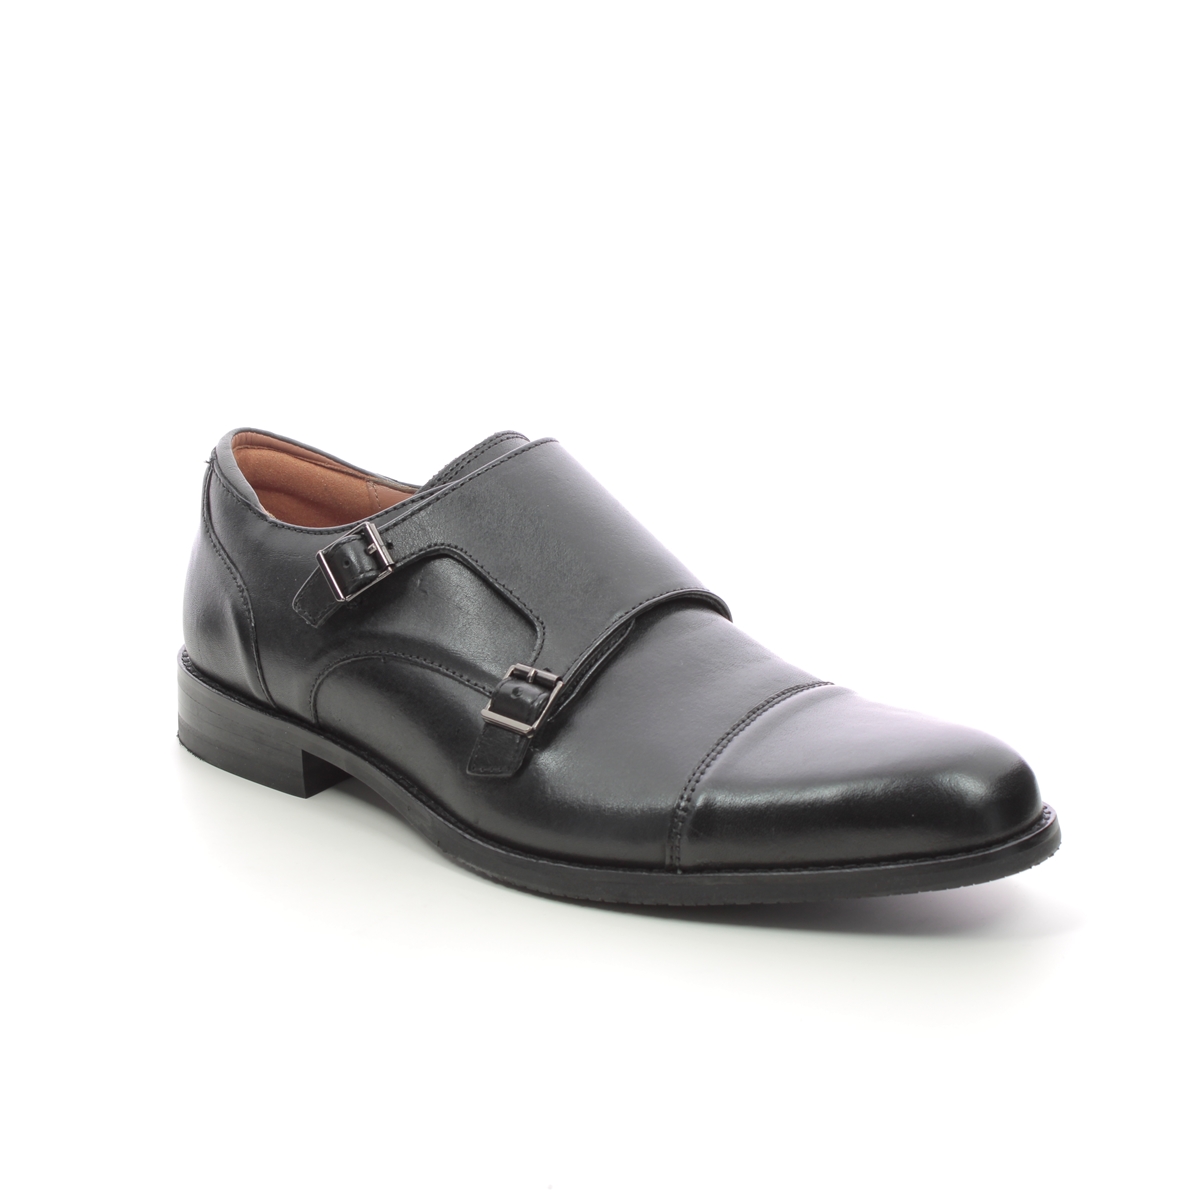 Clarks Craftarlo Monk Black Leather Mens Formal Shoes 724517G In Size 9 In Plain Black Leather G Width Fitting